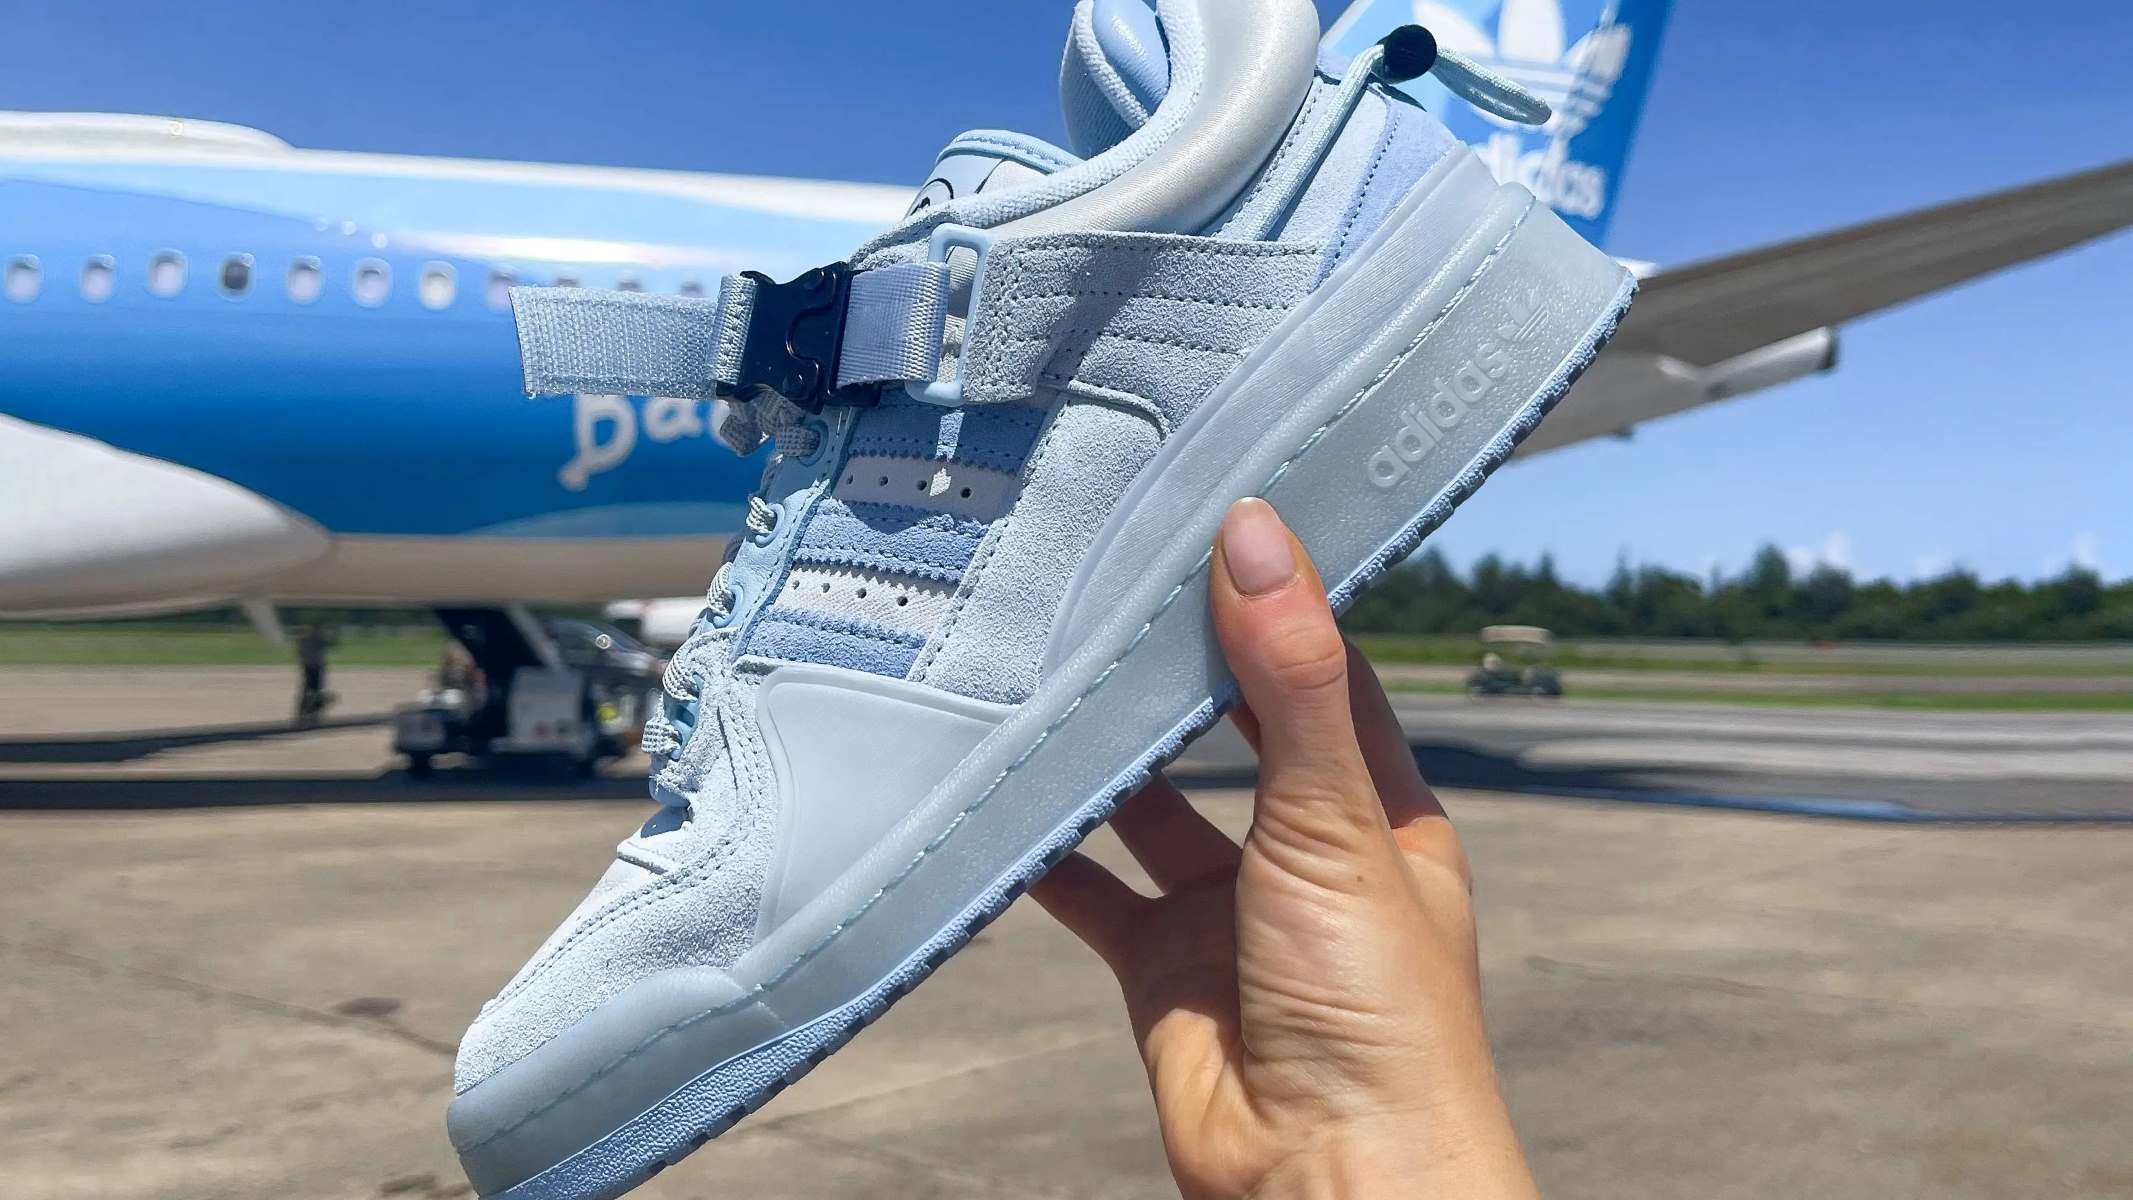 Bad Bunny's New Sneakers: Will They Fly Off The Shelves?